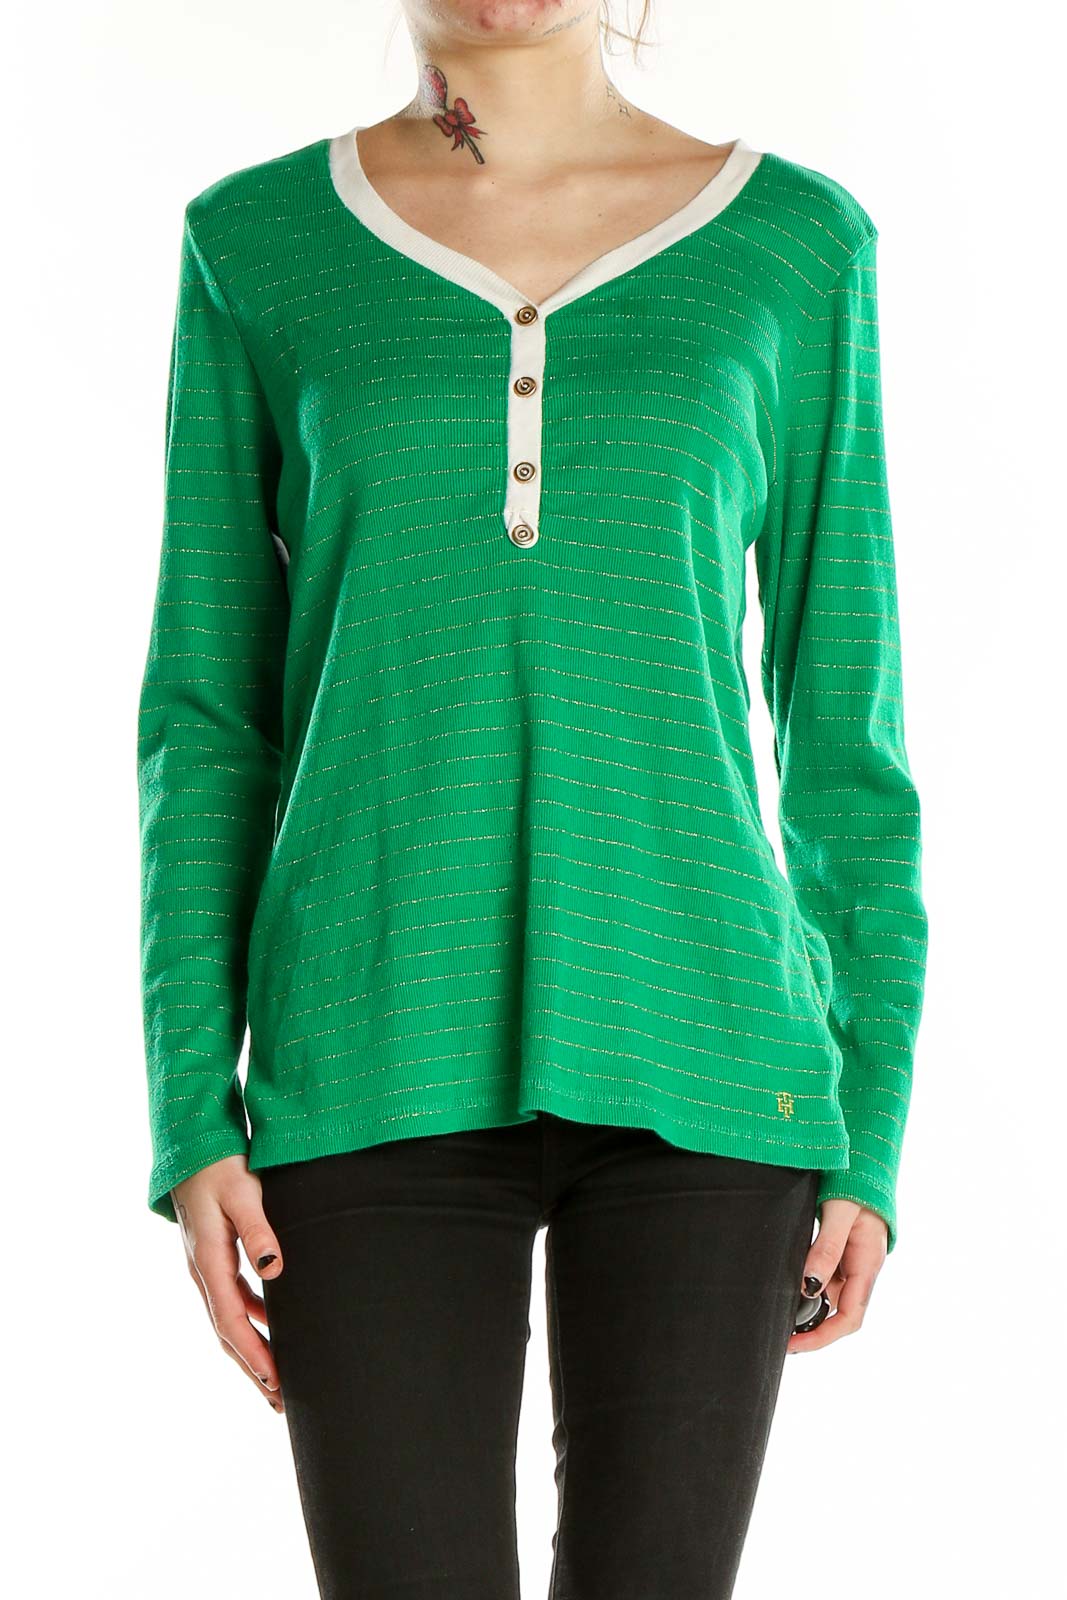 Green Texture Top Front